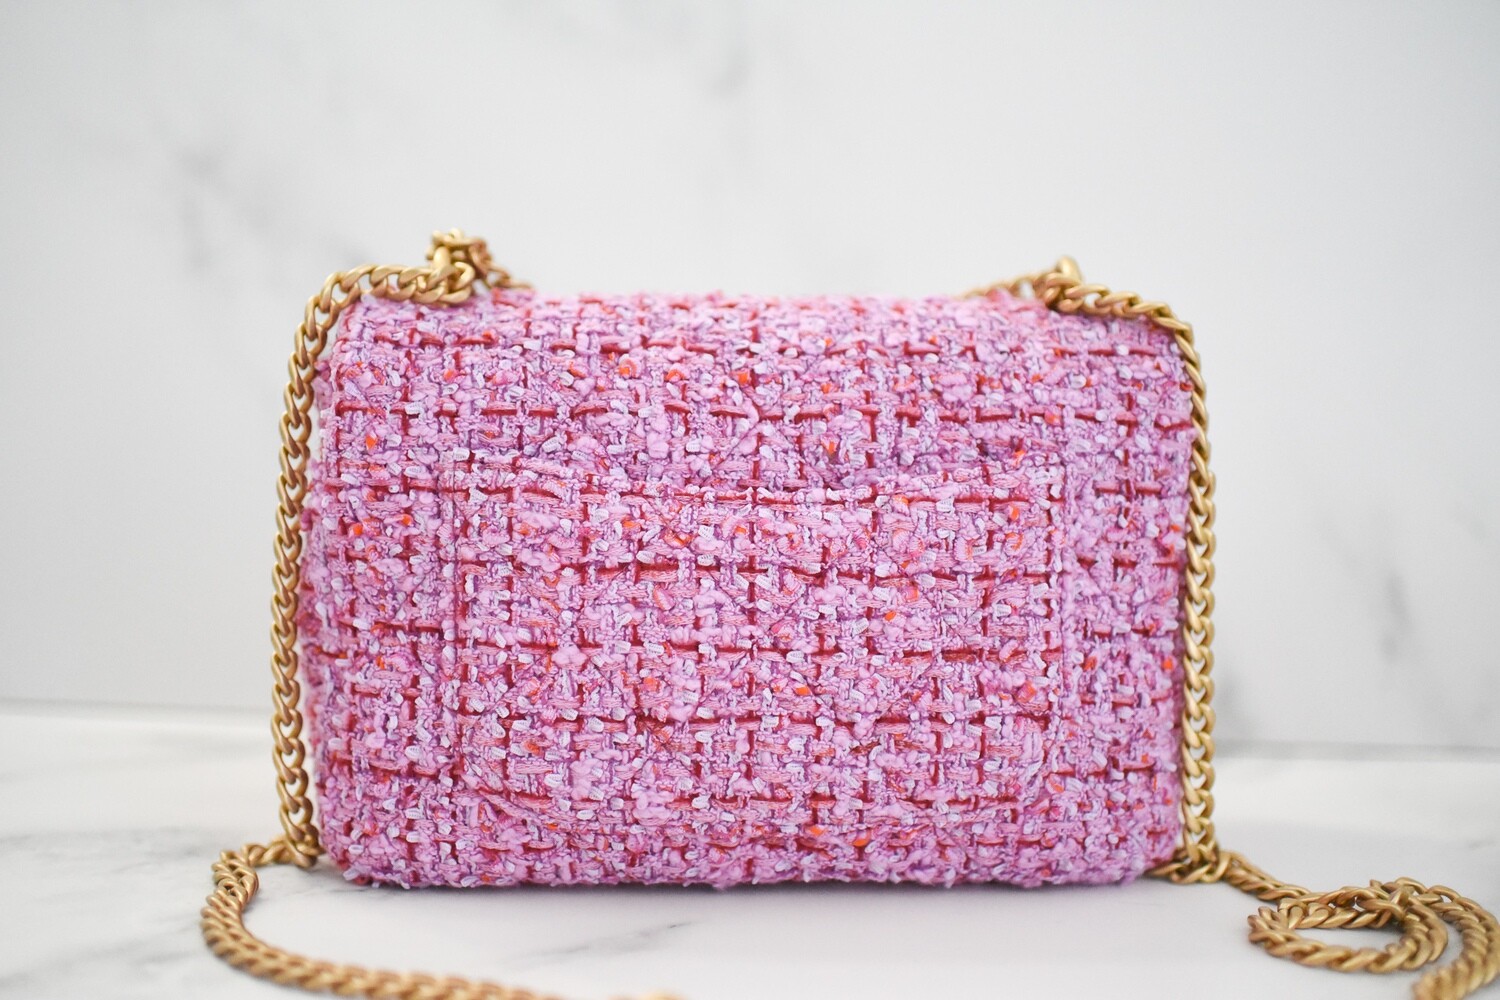 Chanel Tweed Flap Bag, Pink Tweed With Gold Hardware, New In Box